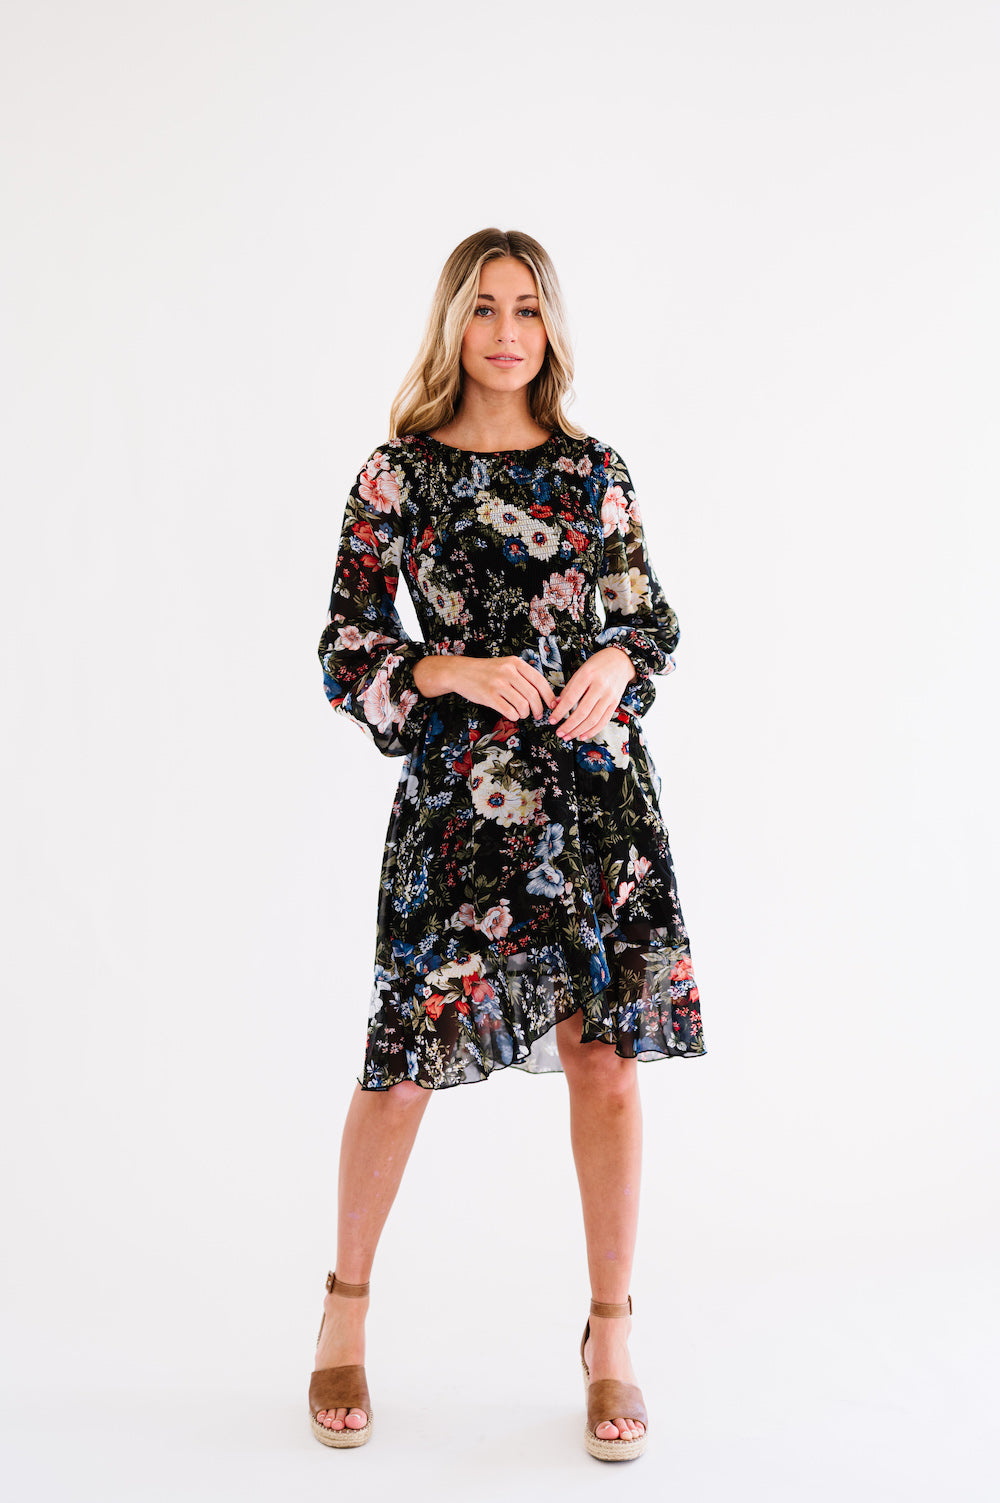 Black floral mini dress with long sleeves